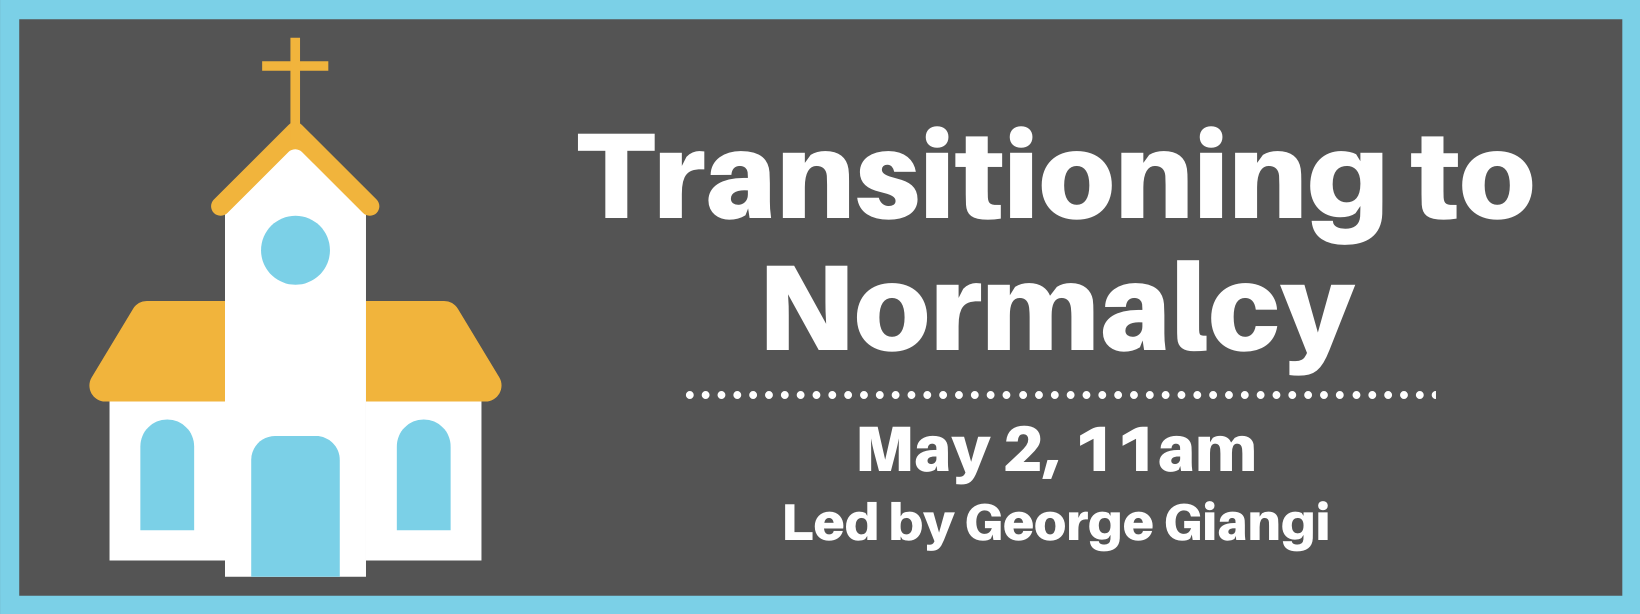 Transitioning to Normalcy